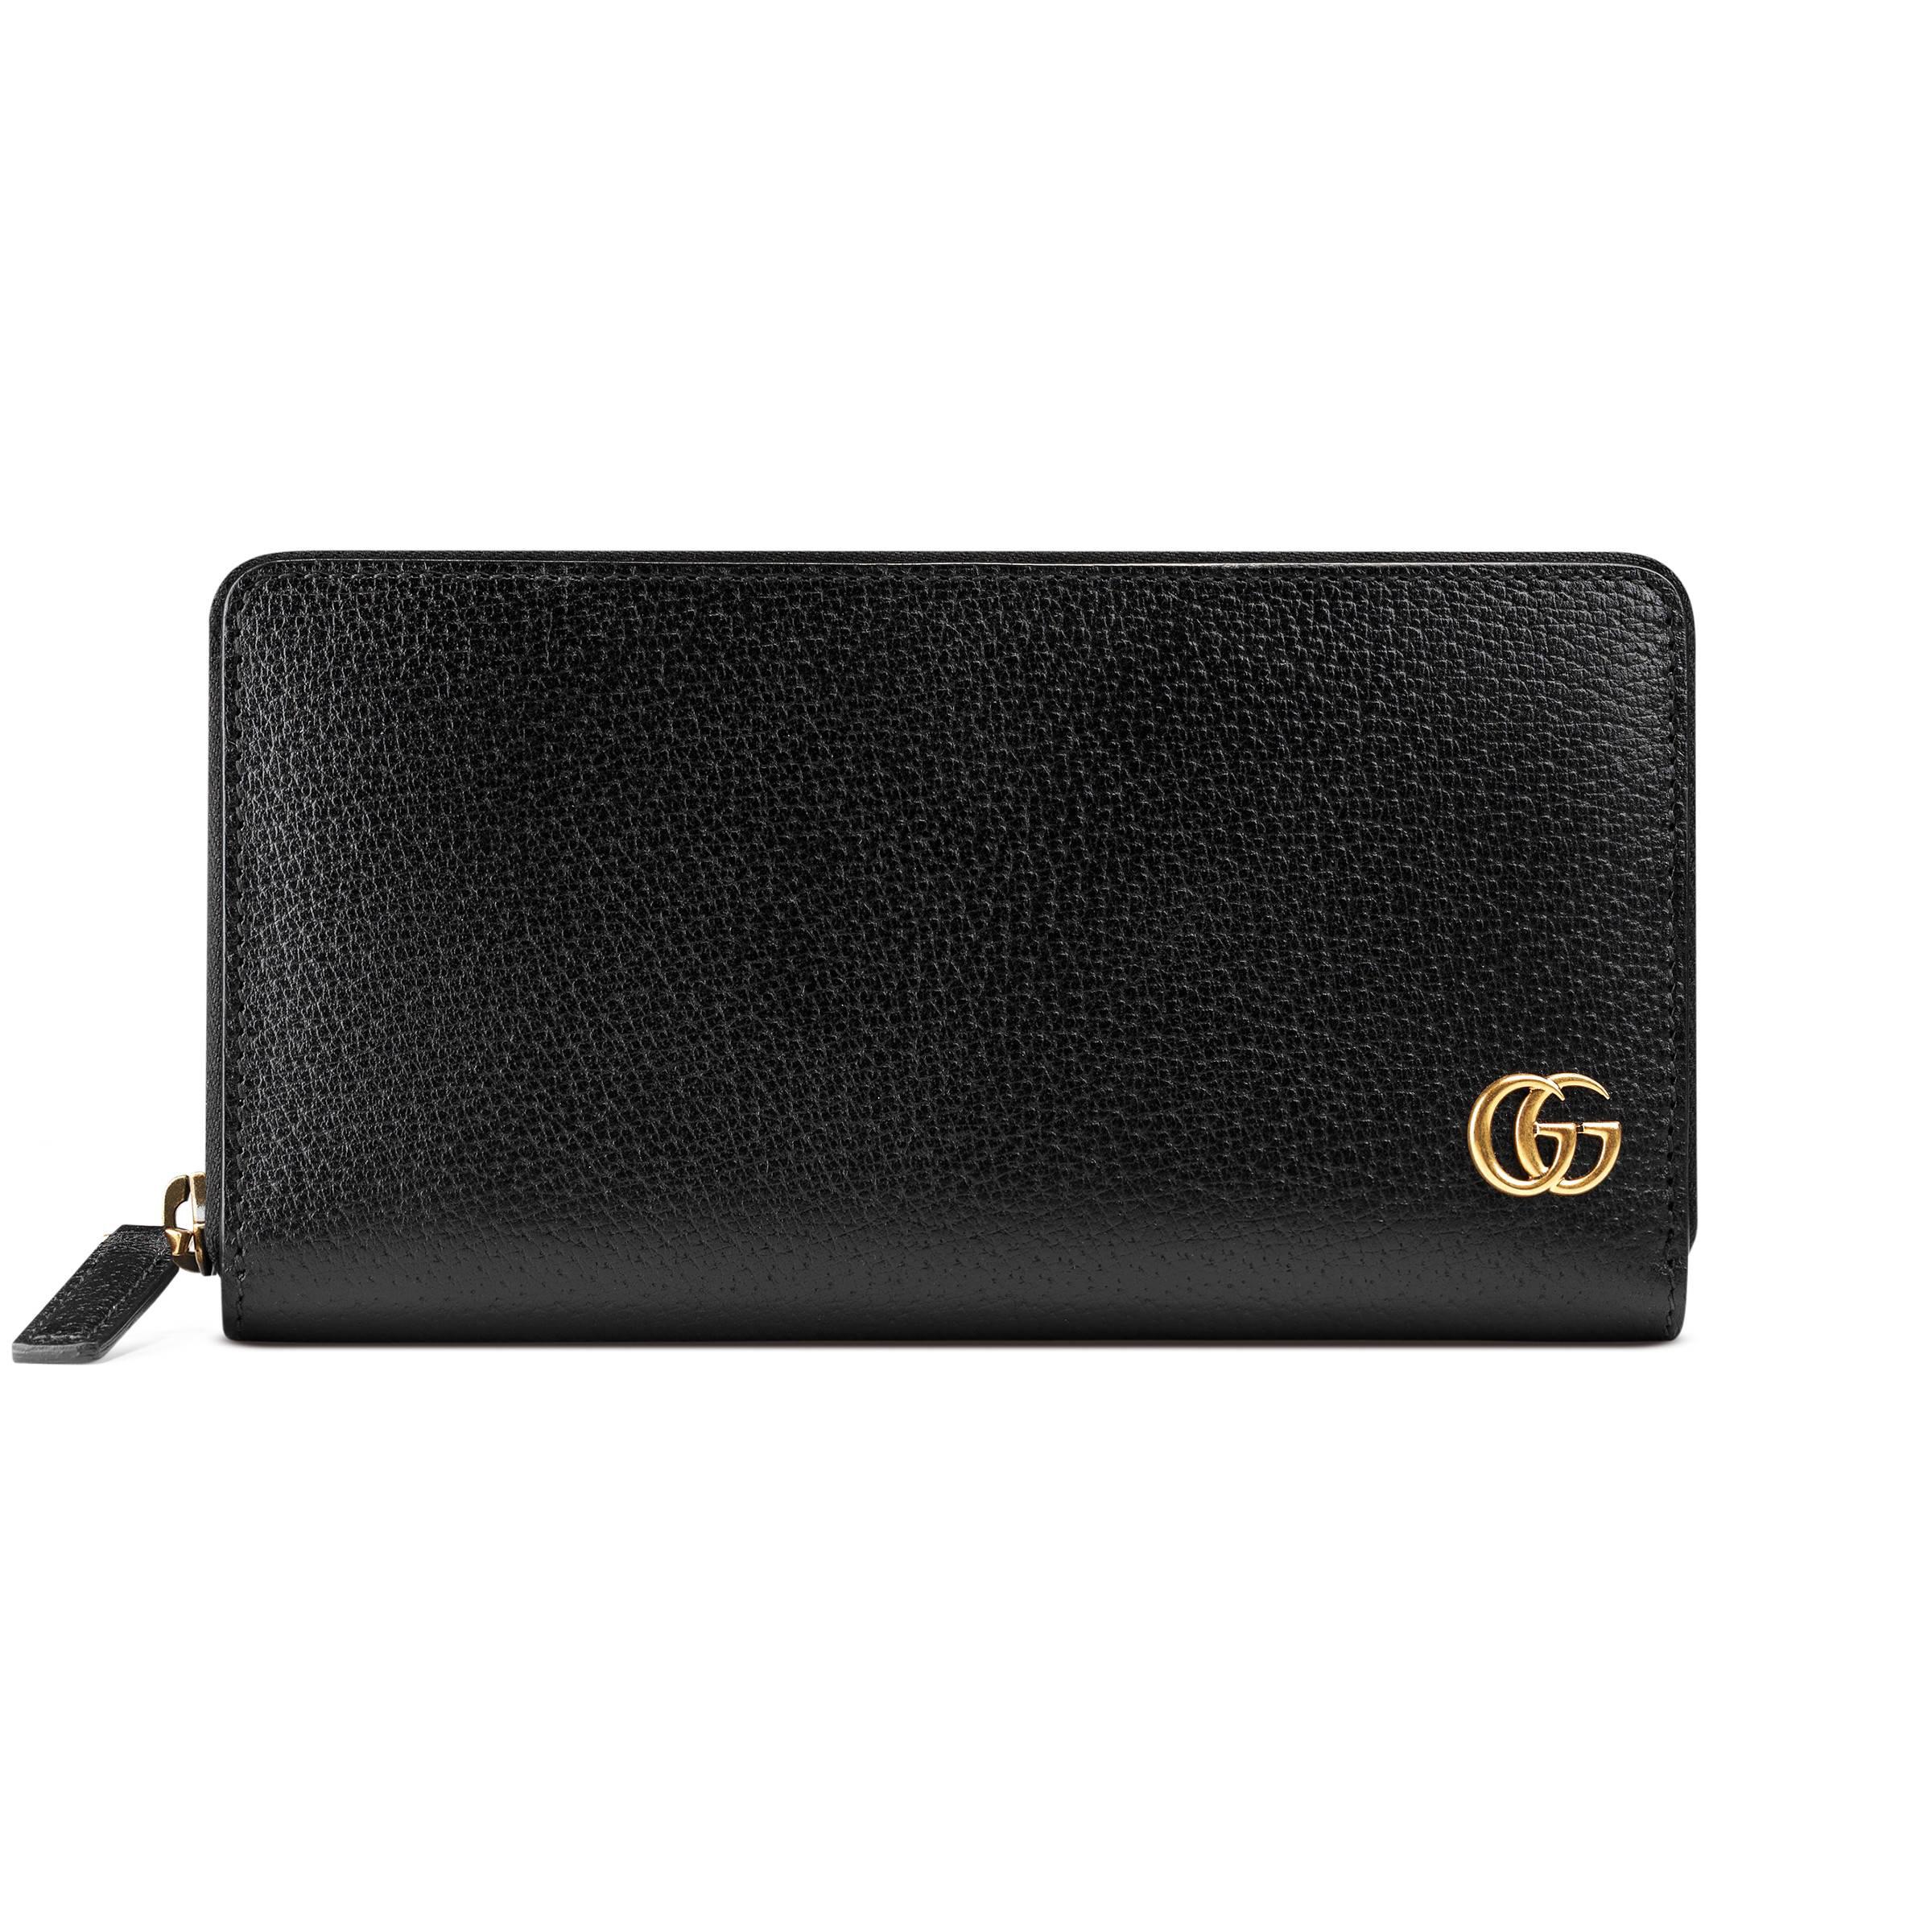 Gucci GG Marmont Leather Zip Around Wallet in Black for Men - Lyst